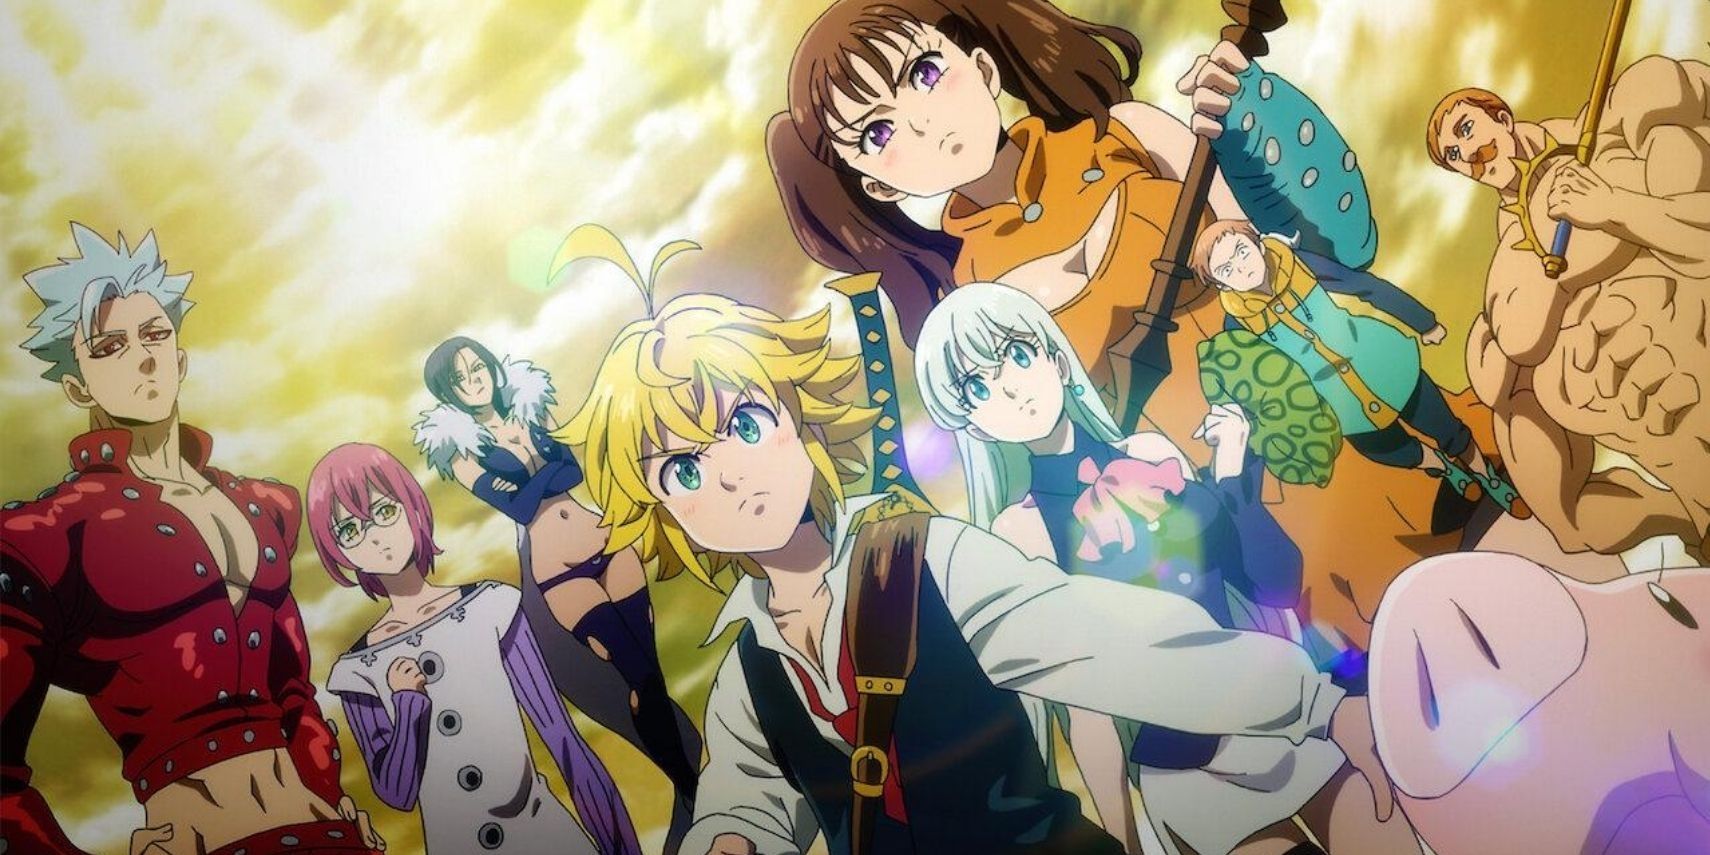 15 HQ Pictures 7 Deadly Sins Movie Characters : 7 Reasons to Watch Seven Deadly Sins on Netflix